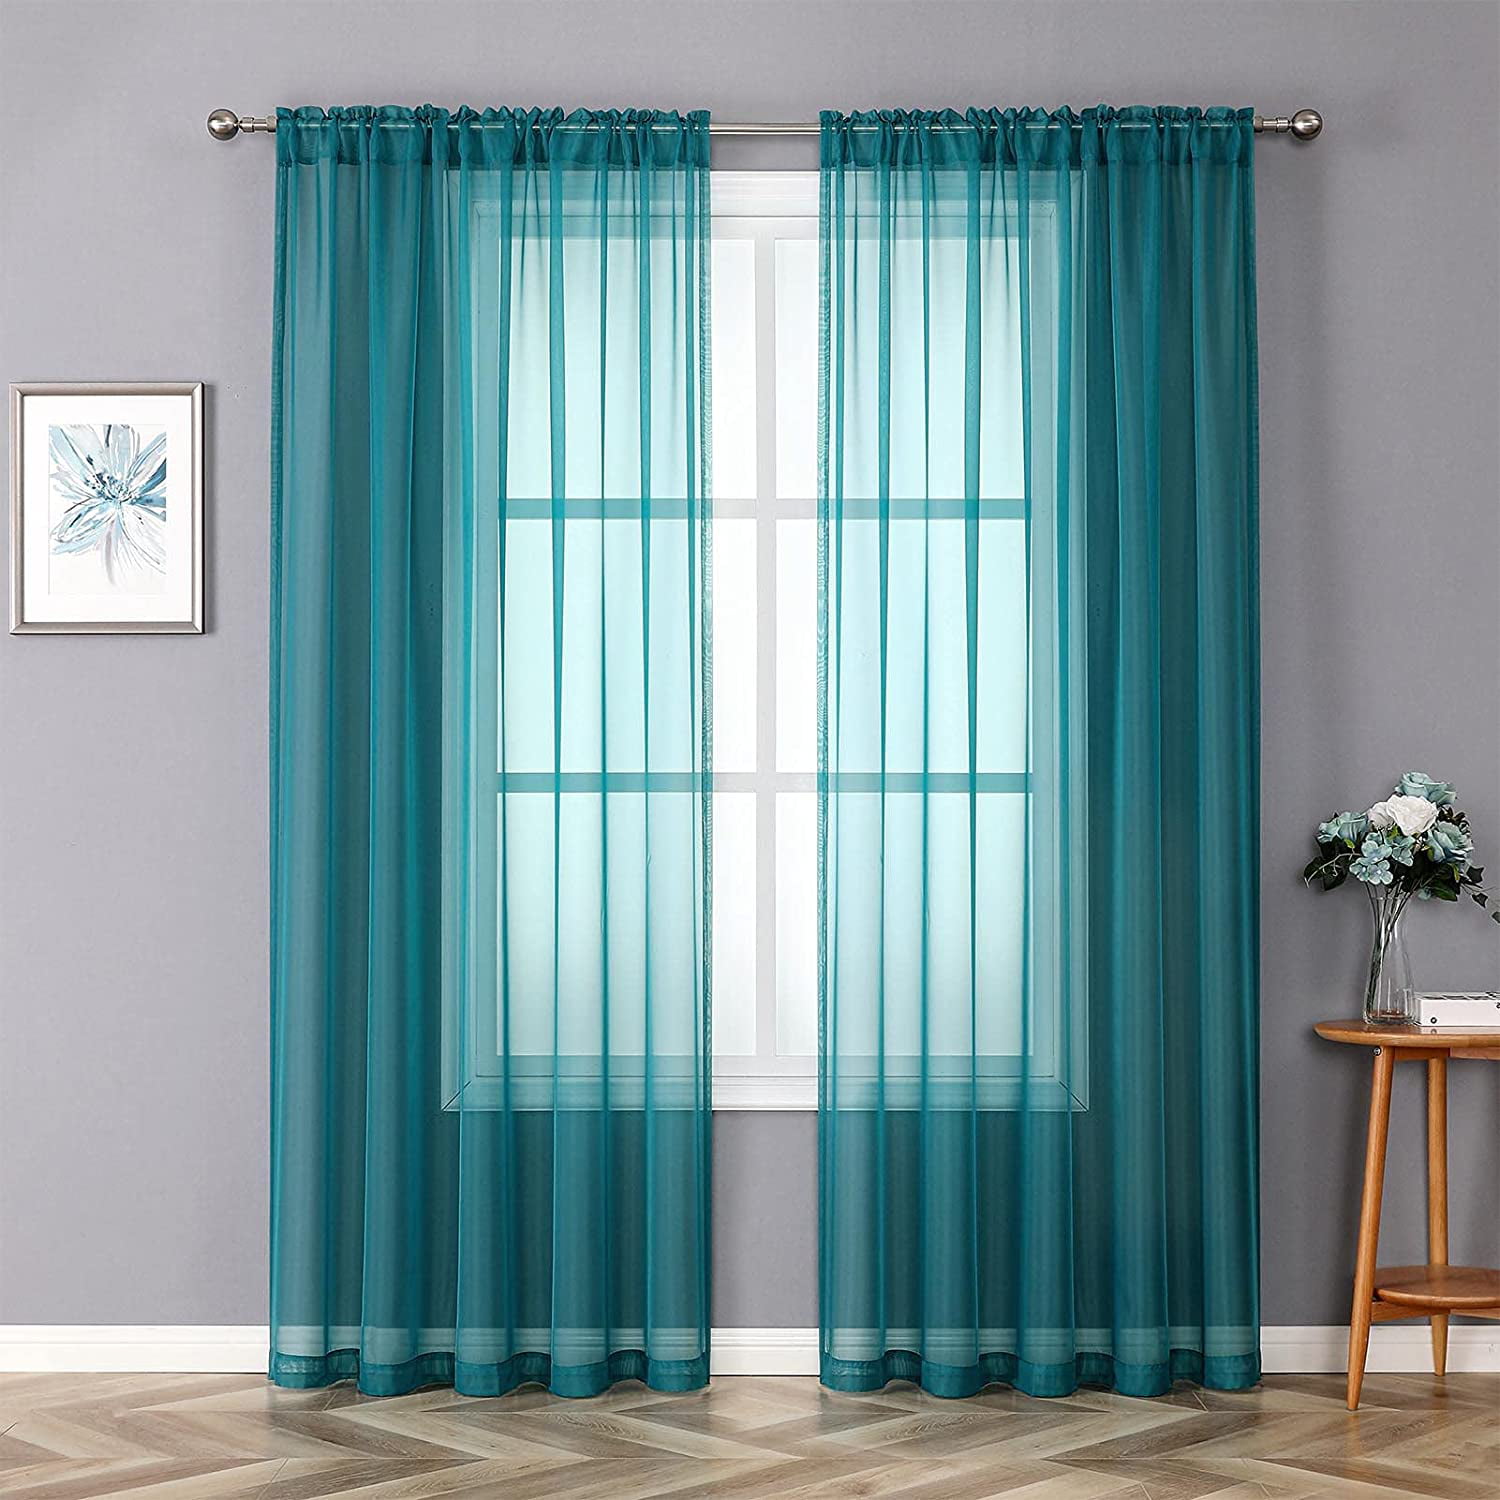 Lilac/Turquoise Luxurious Tight-Woven Elegant Sheer Rod Pocket Curtain Panels 